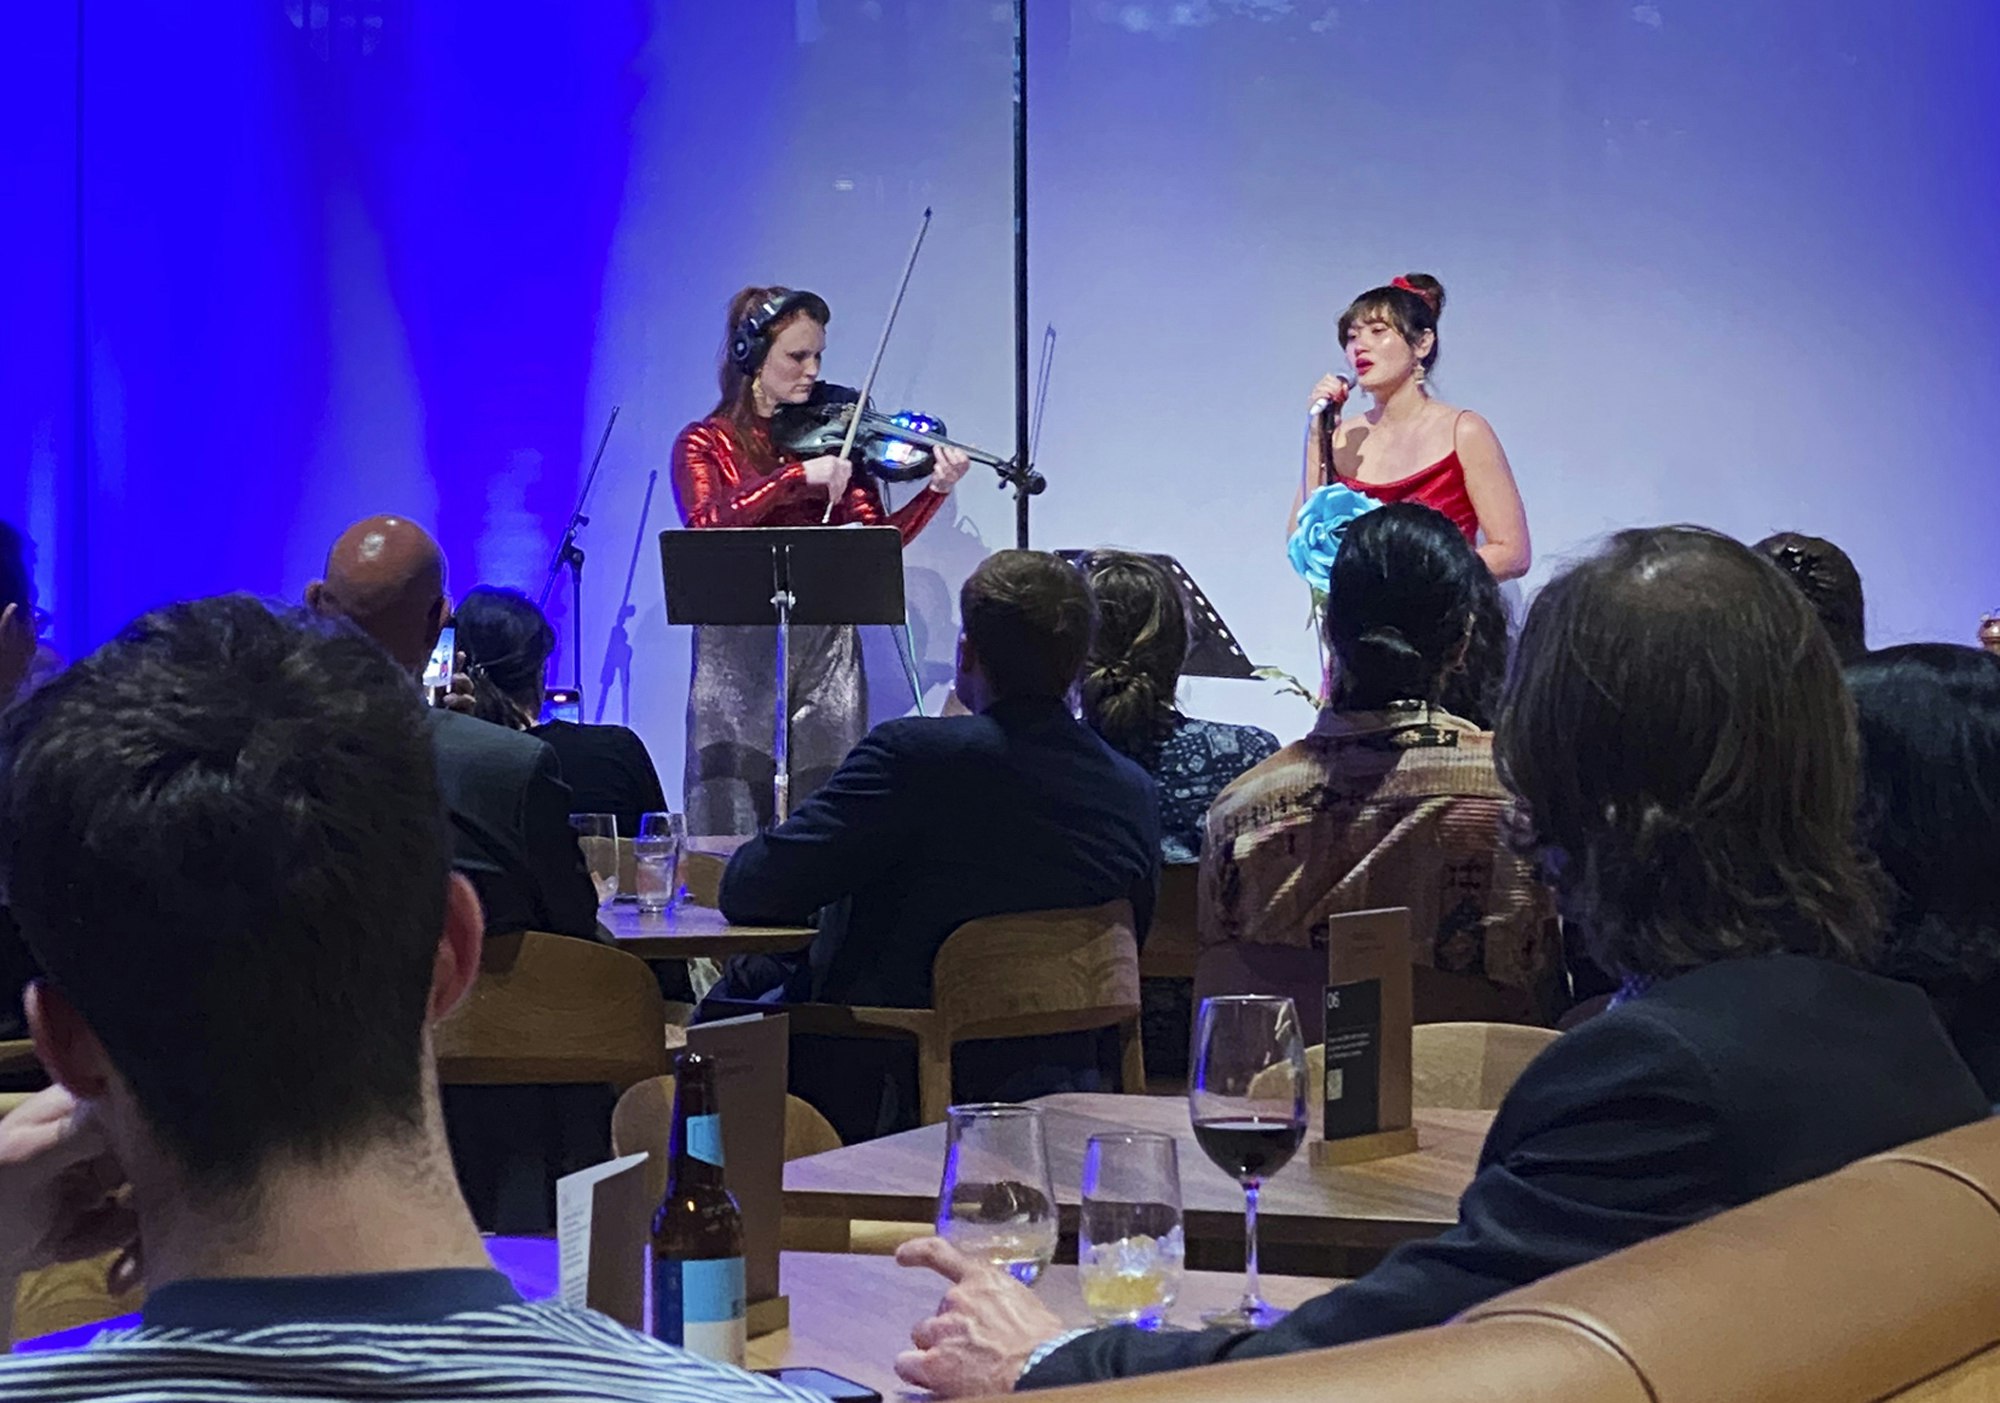 A singer and a violinist perform in front of an audience seated at tables